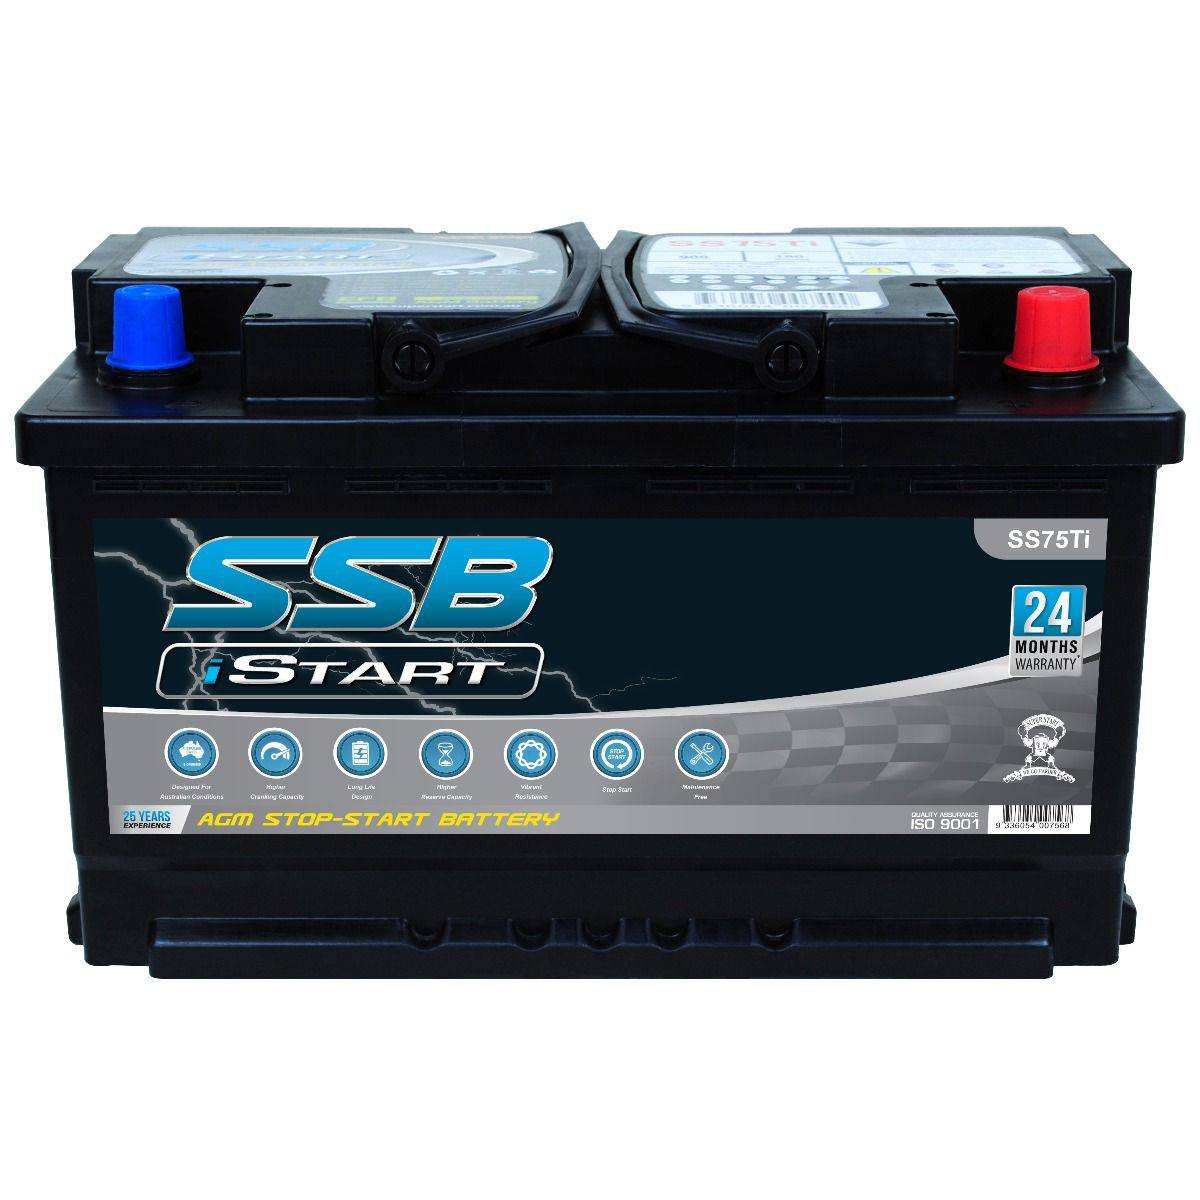 4X4 Battery Suits Ford Ranger 2015 3.2L Auto PX MK11 Start Stop Diesel (Online Only)